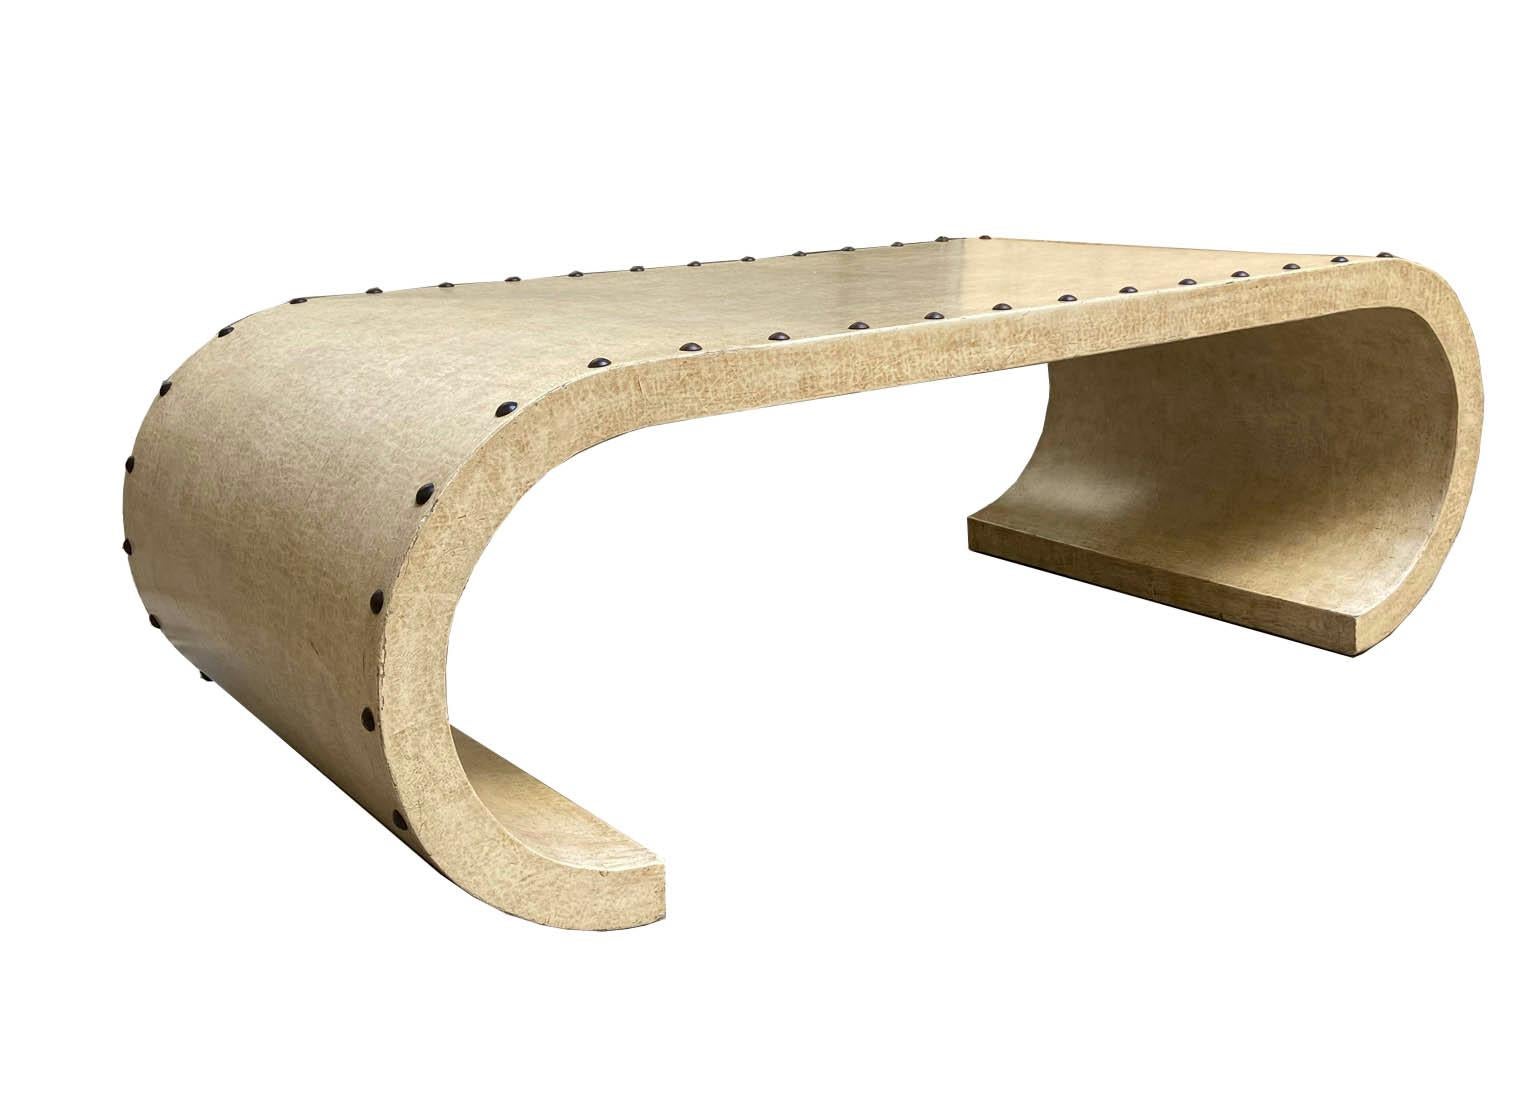 Beautiful coffee table made of wood covered in goatskin parchment, with brass studs.